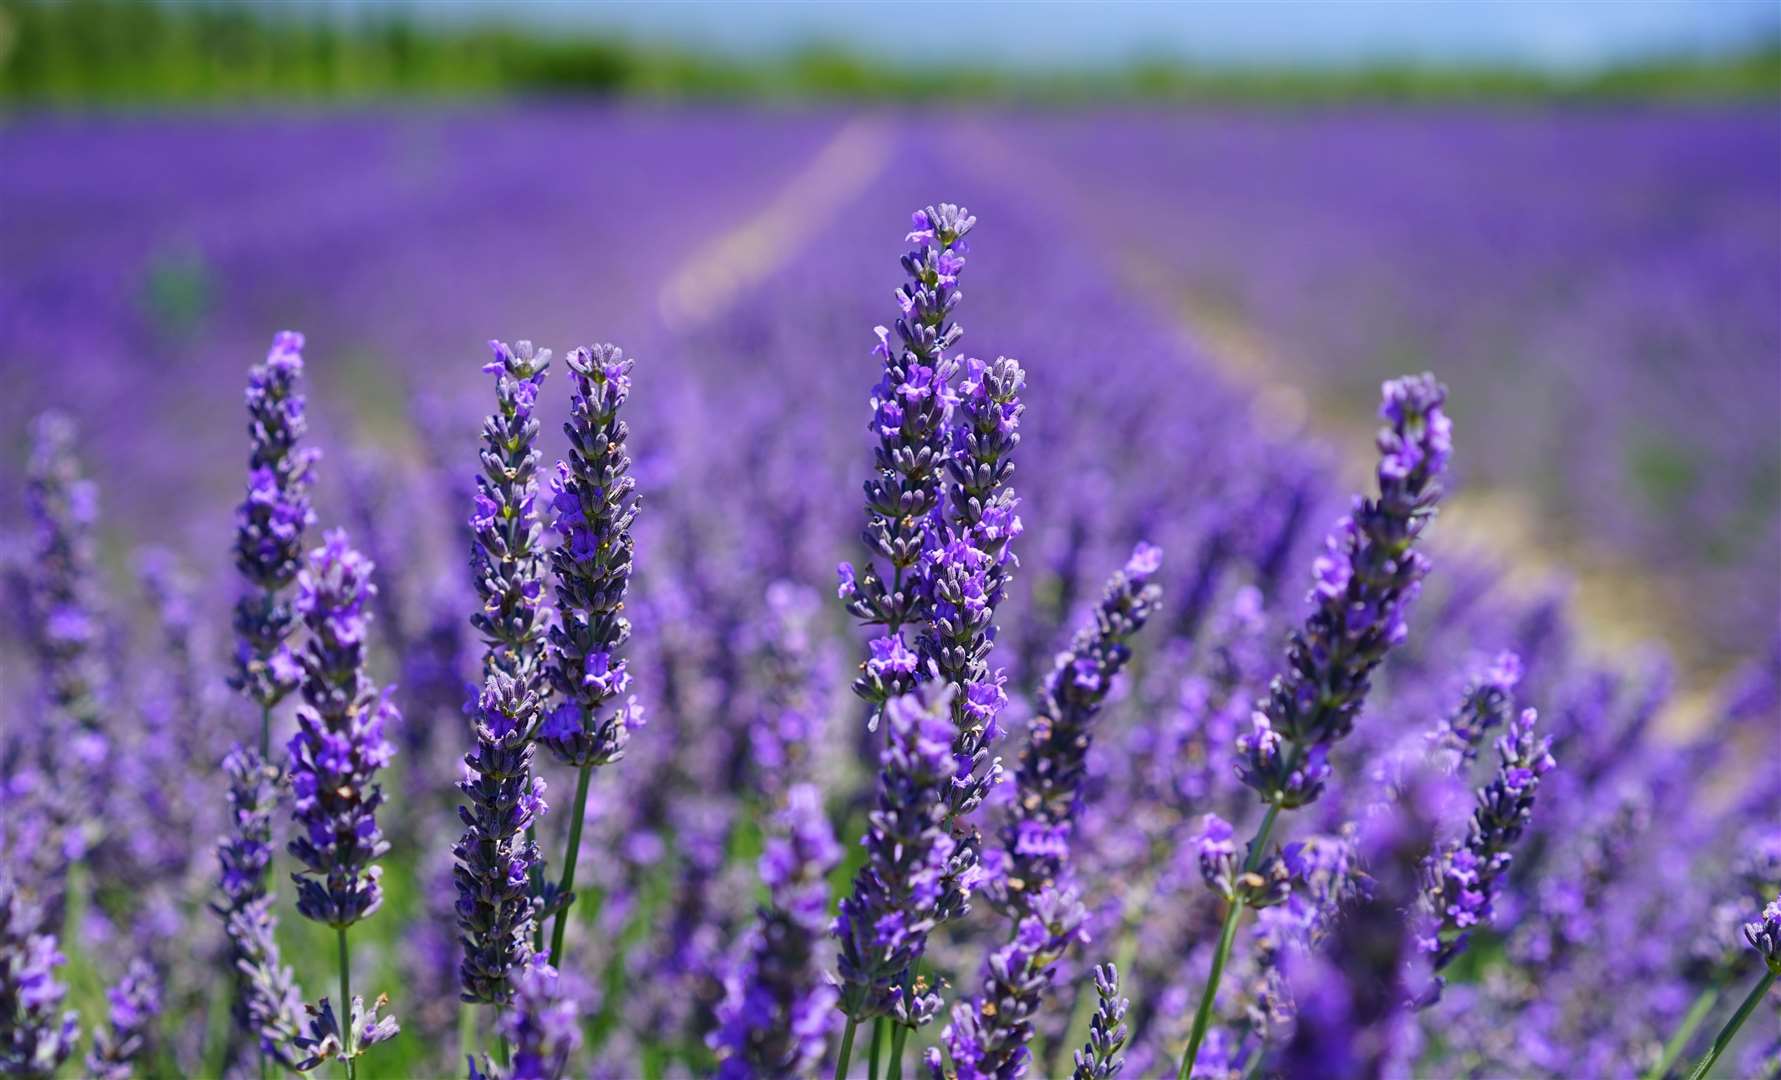 Beck Evans Farm is often open for seasonal events, including its lavender farm in the summer months. Picture: Beck Evans Farm